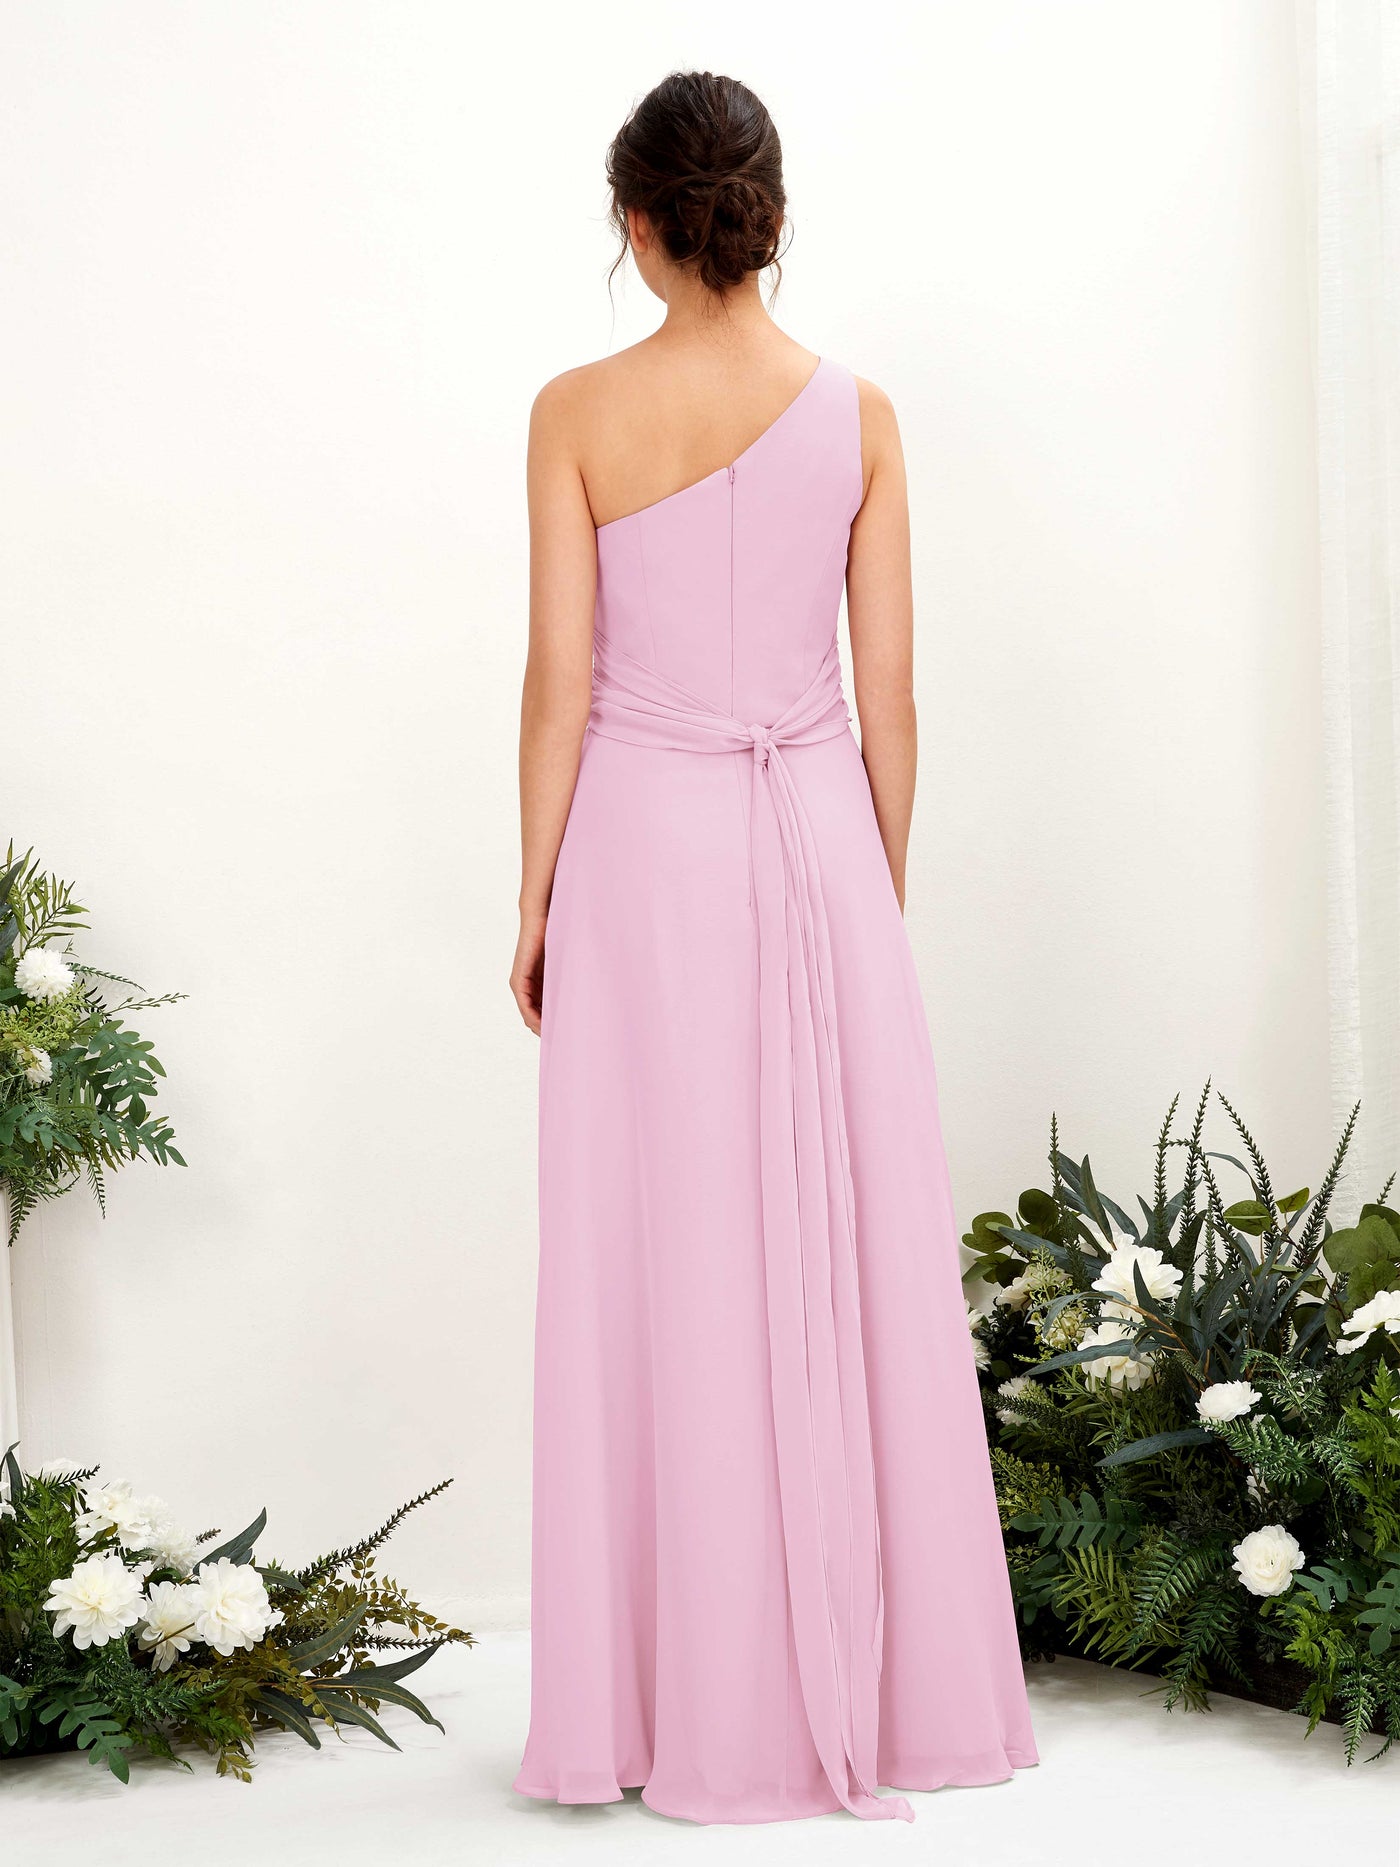 Candy Pink Bridesmaid Dresses Bridesmaid Dress A-line Chiffon One Shoulder Full Length Sleeveless Wedding Party Dress (81224739)#color_candy-pink